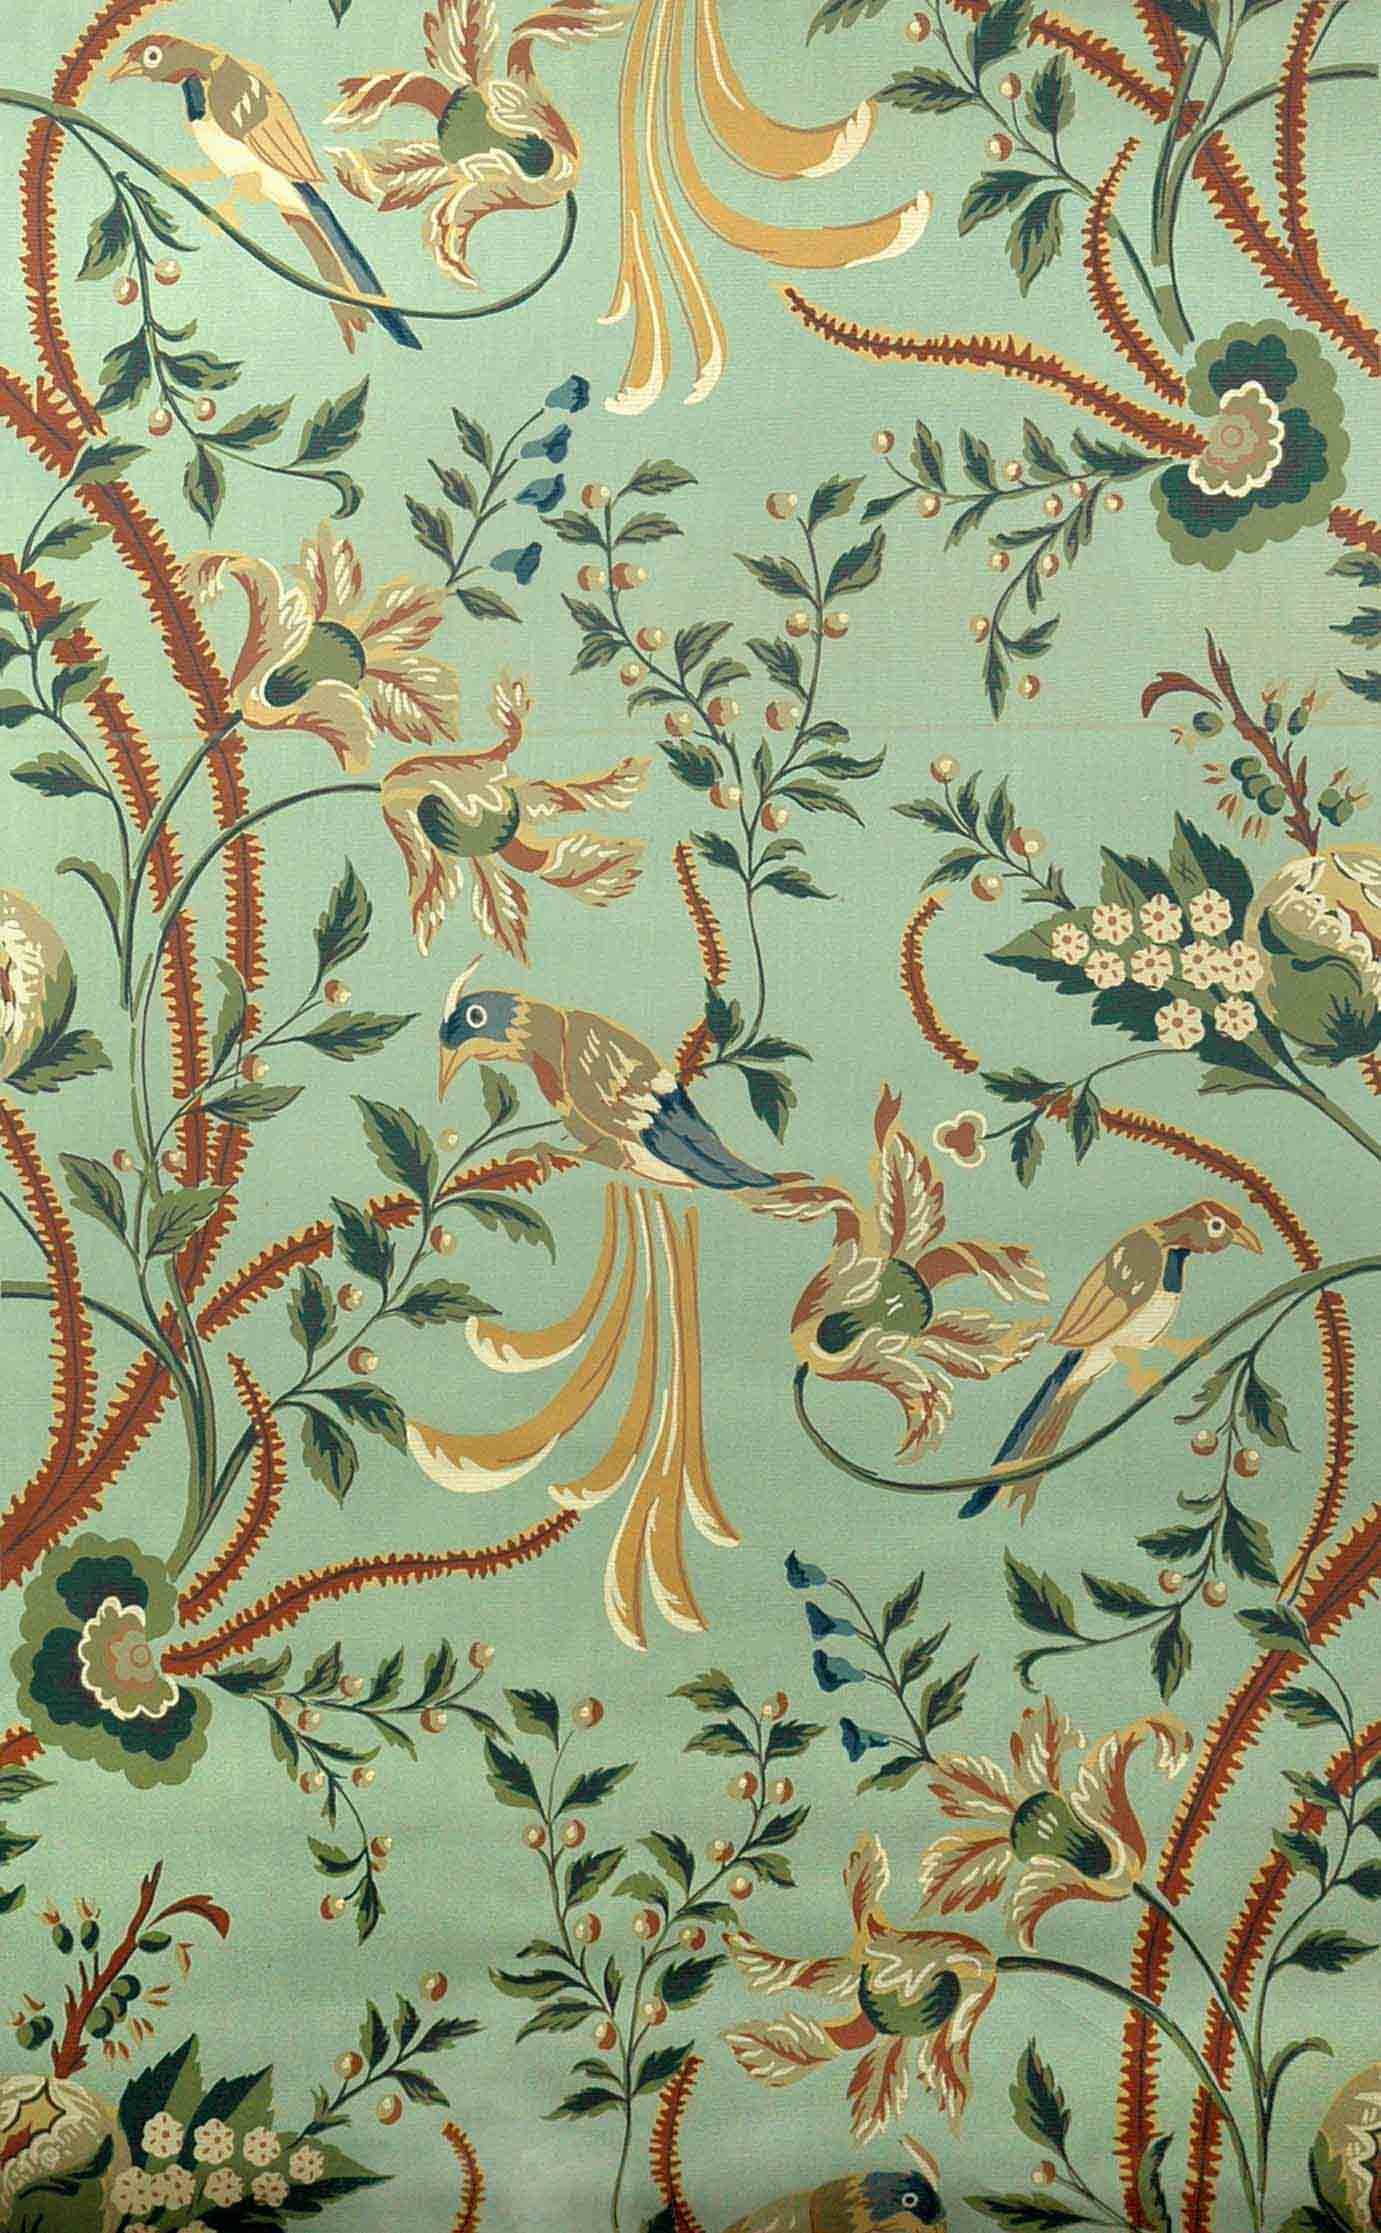 1381x2233 historical wallpaper / green with birds, flowers and foliage /